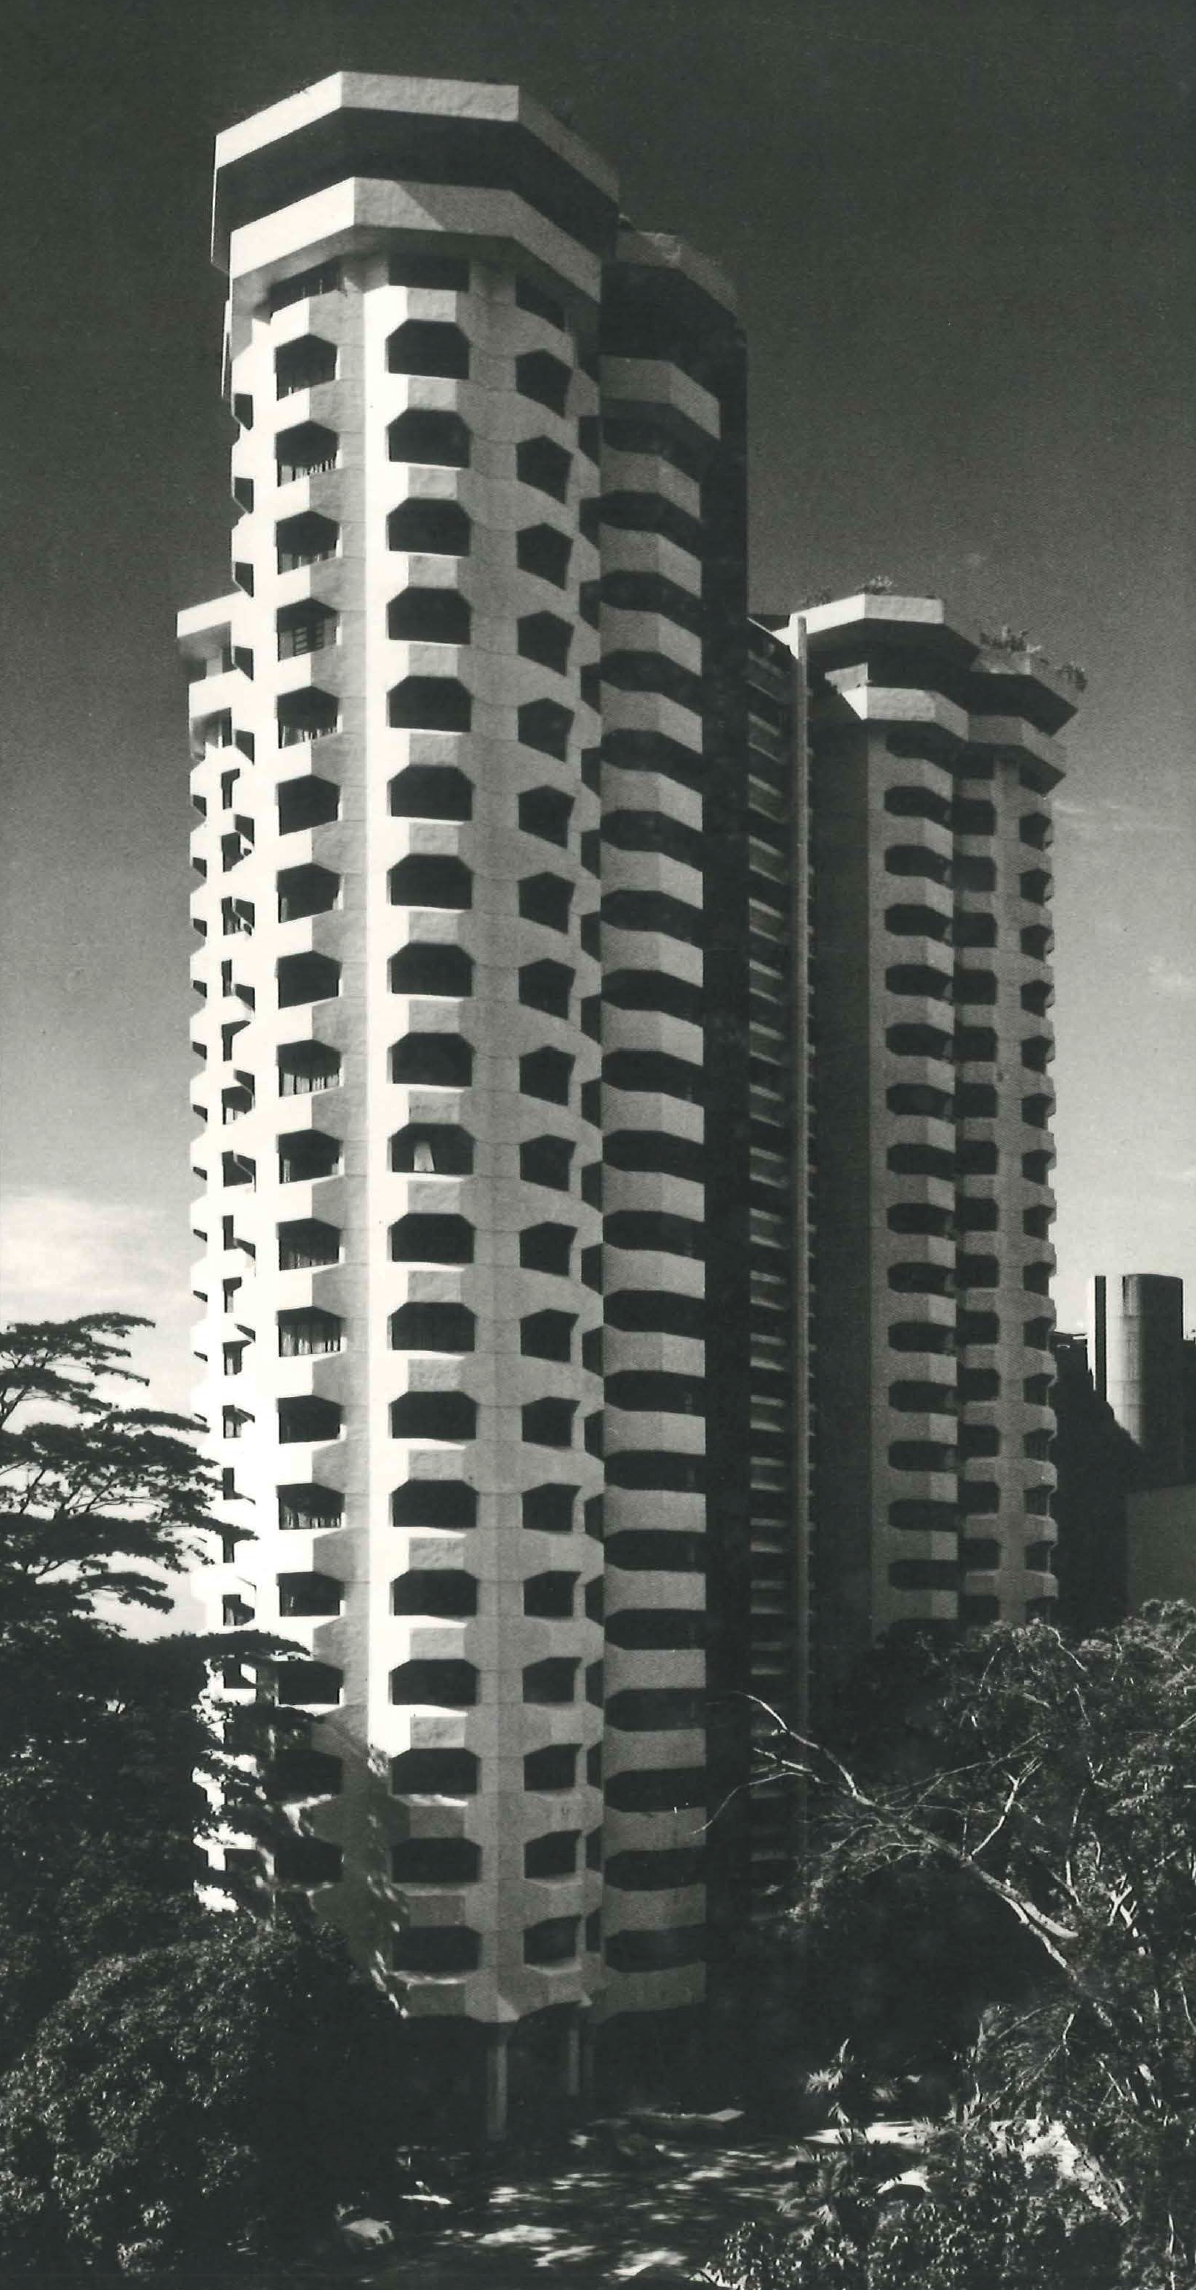 Exterior view of the Highpoint Apartments. Source: Promotional brochure of the firm in the author's collection.